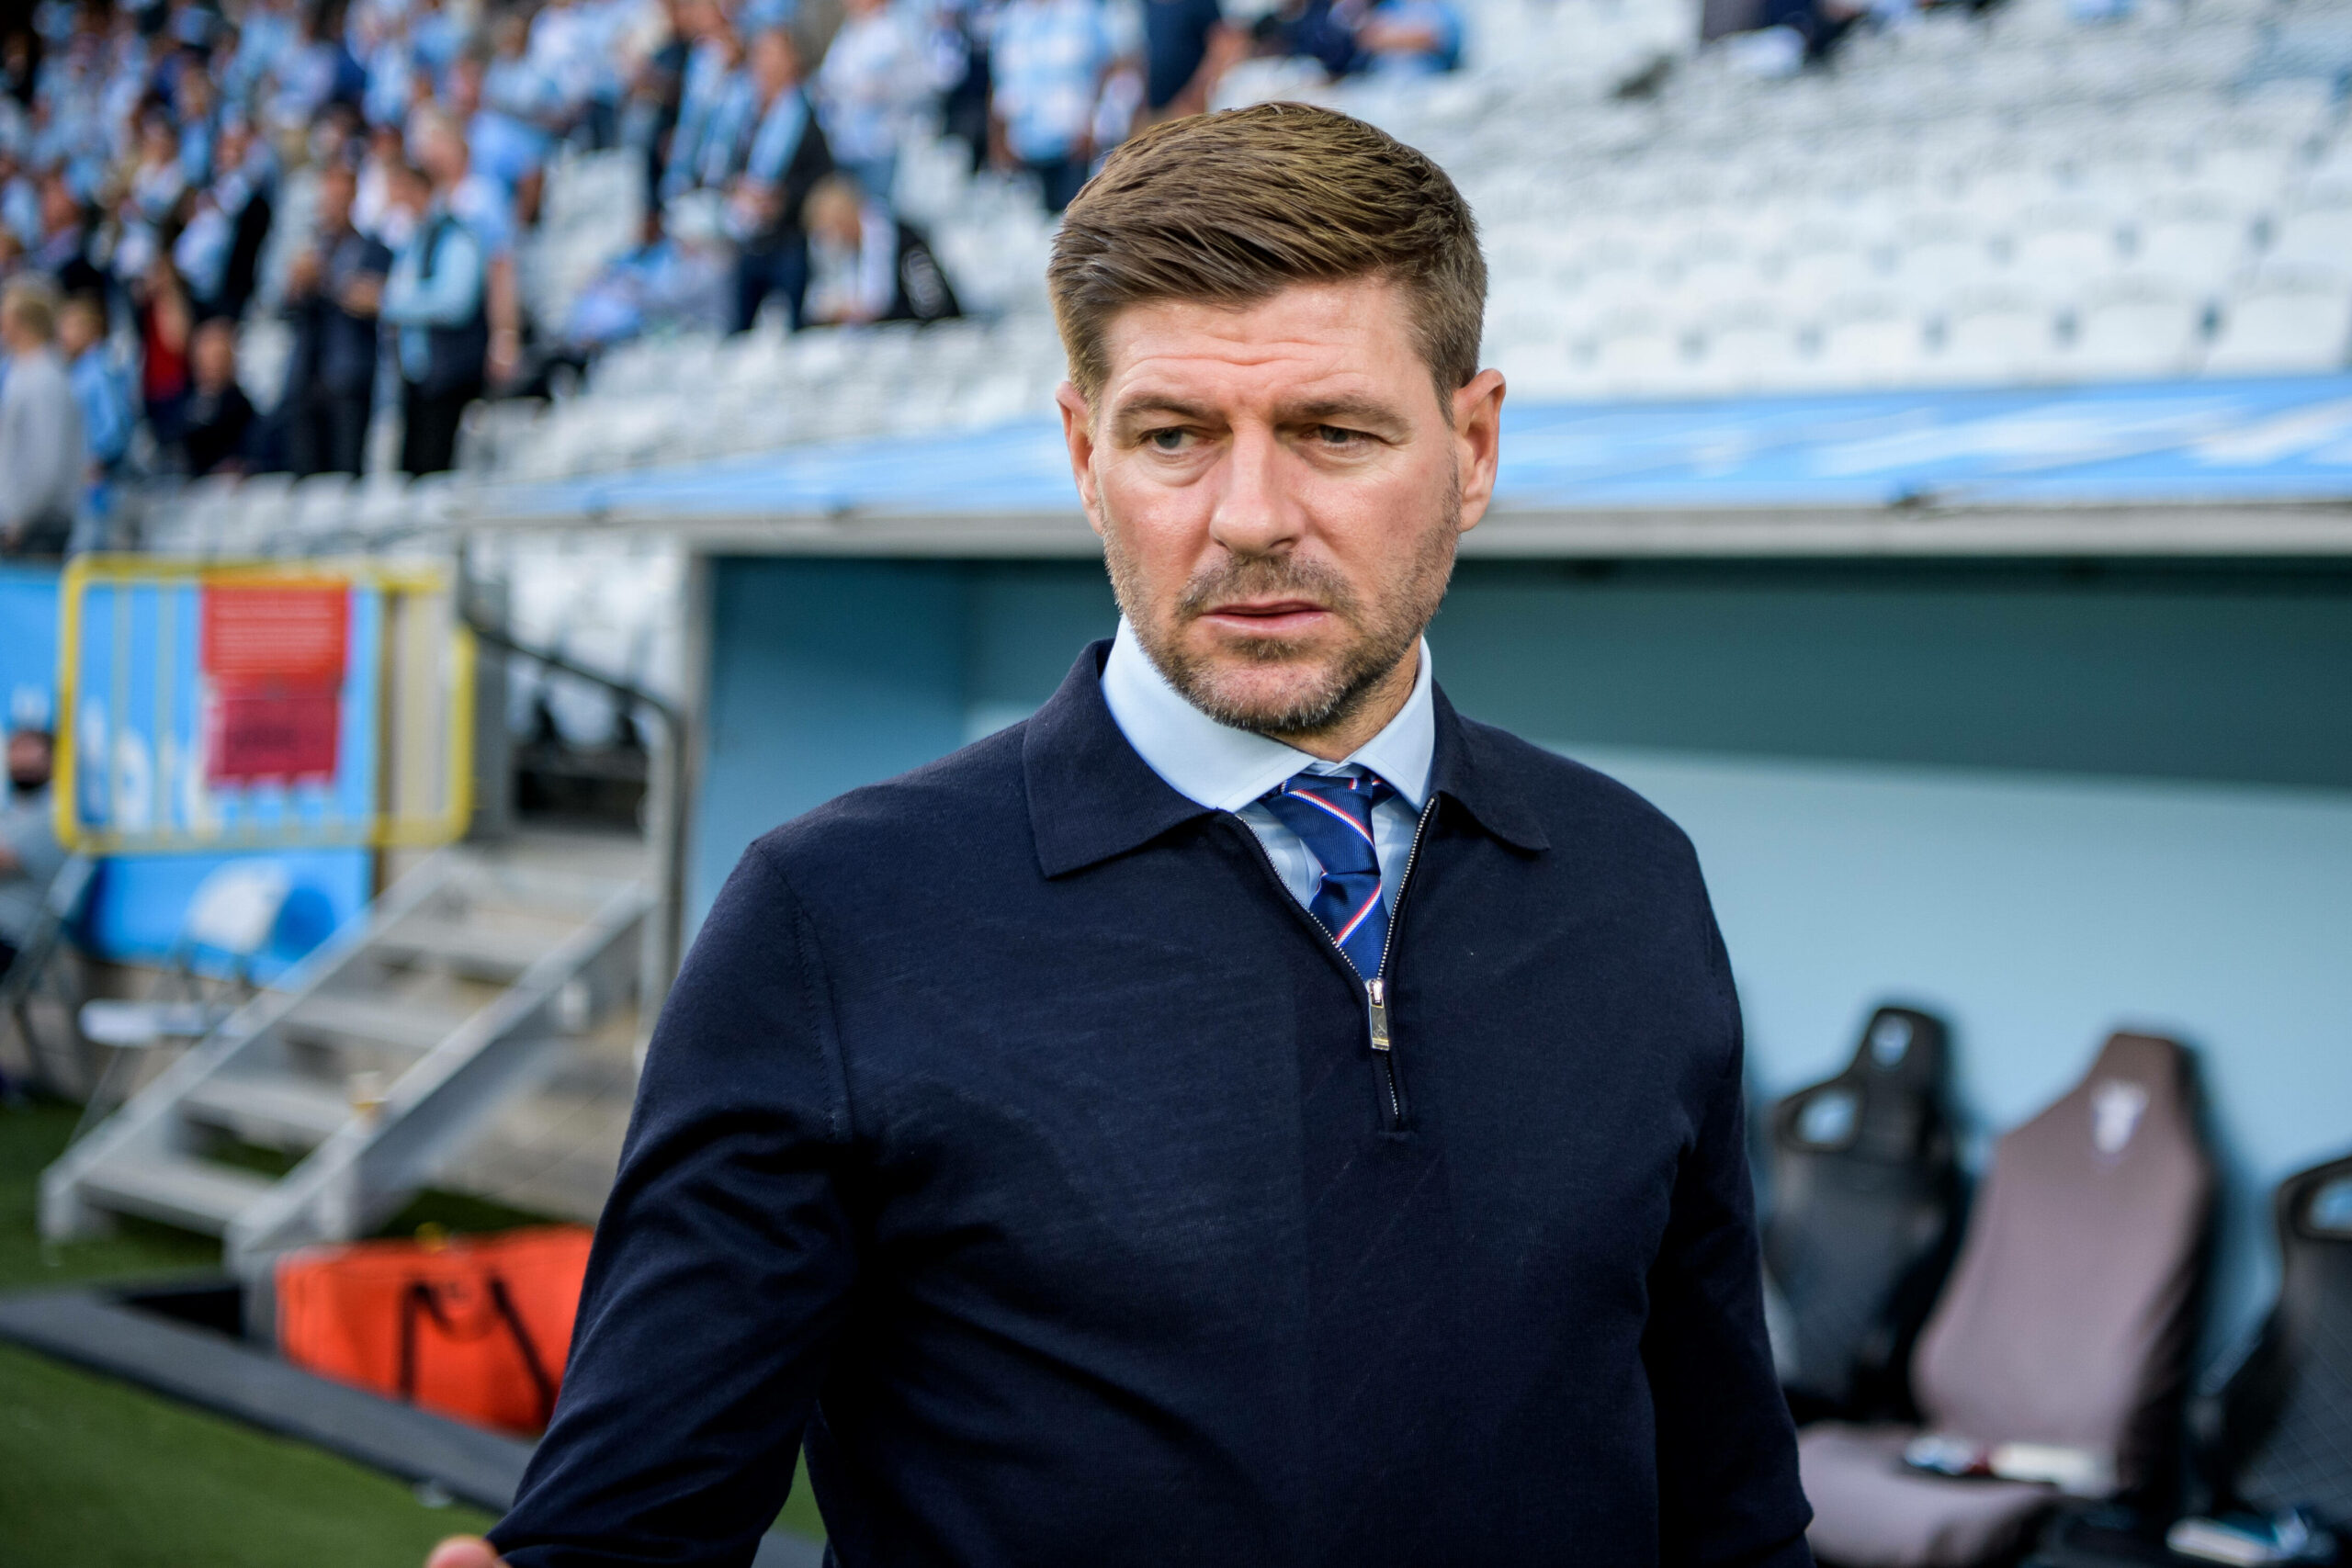 Steven Gerrard made some interesting comments after Malmo